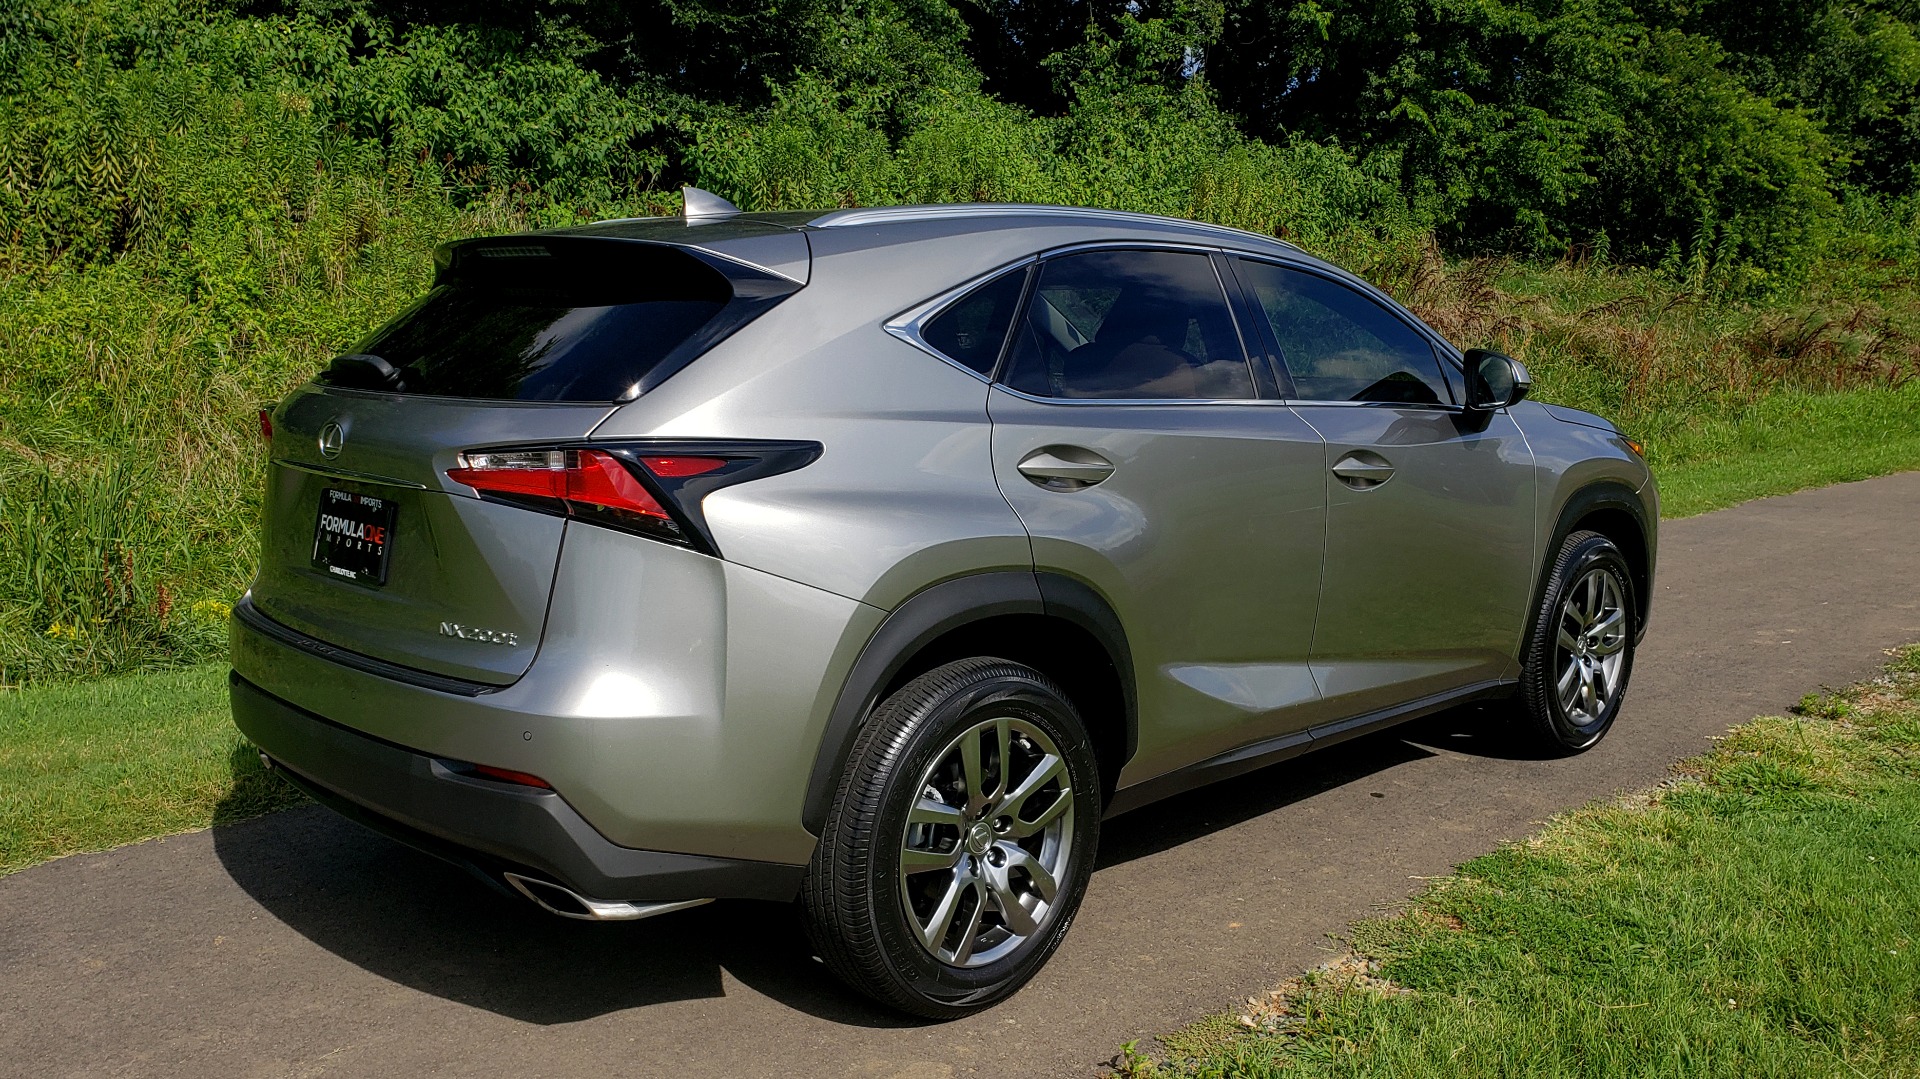 Used 2016 Lexus NX 200T FWD / PREMIUM PKG / SUNROOF / BSM / REARVIEW for sale Sold at Formula Imports in Charlotte NC 28227 6